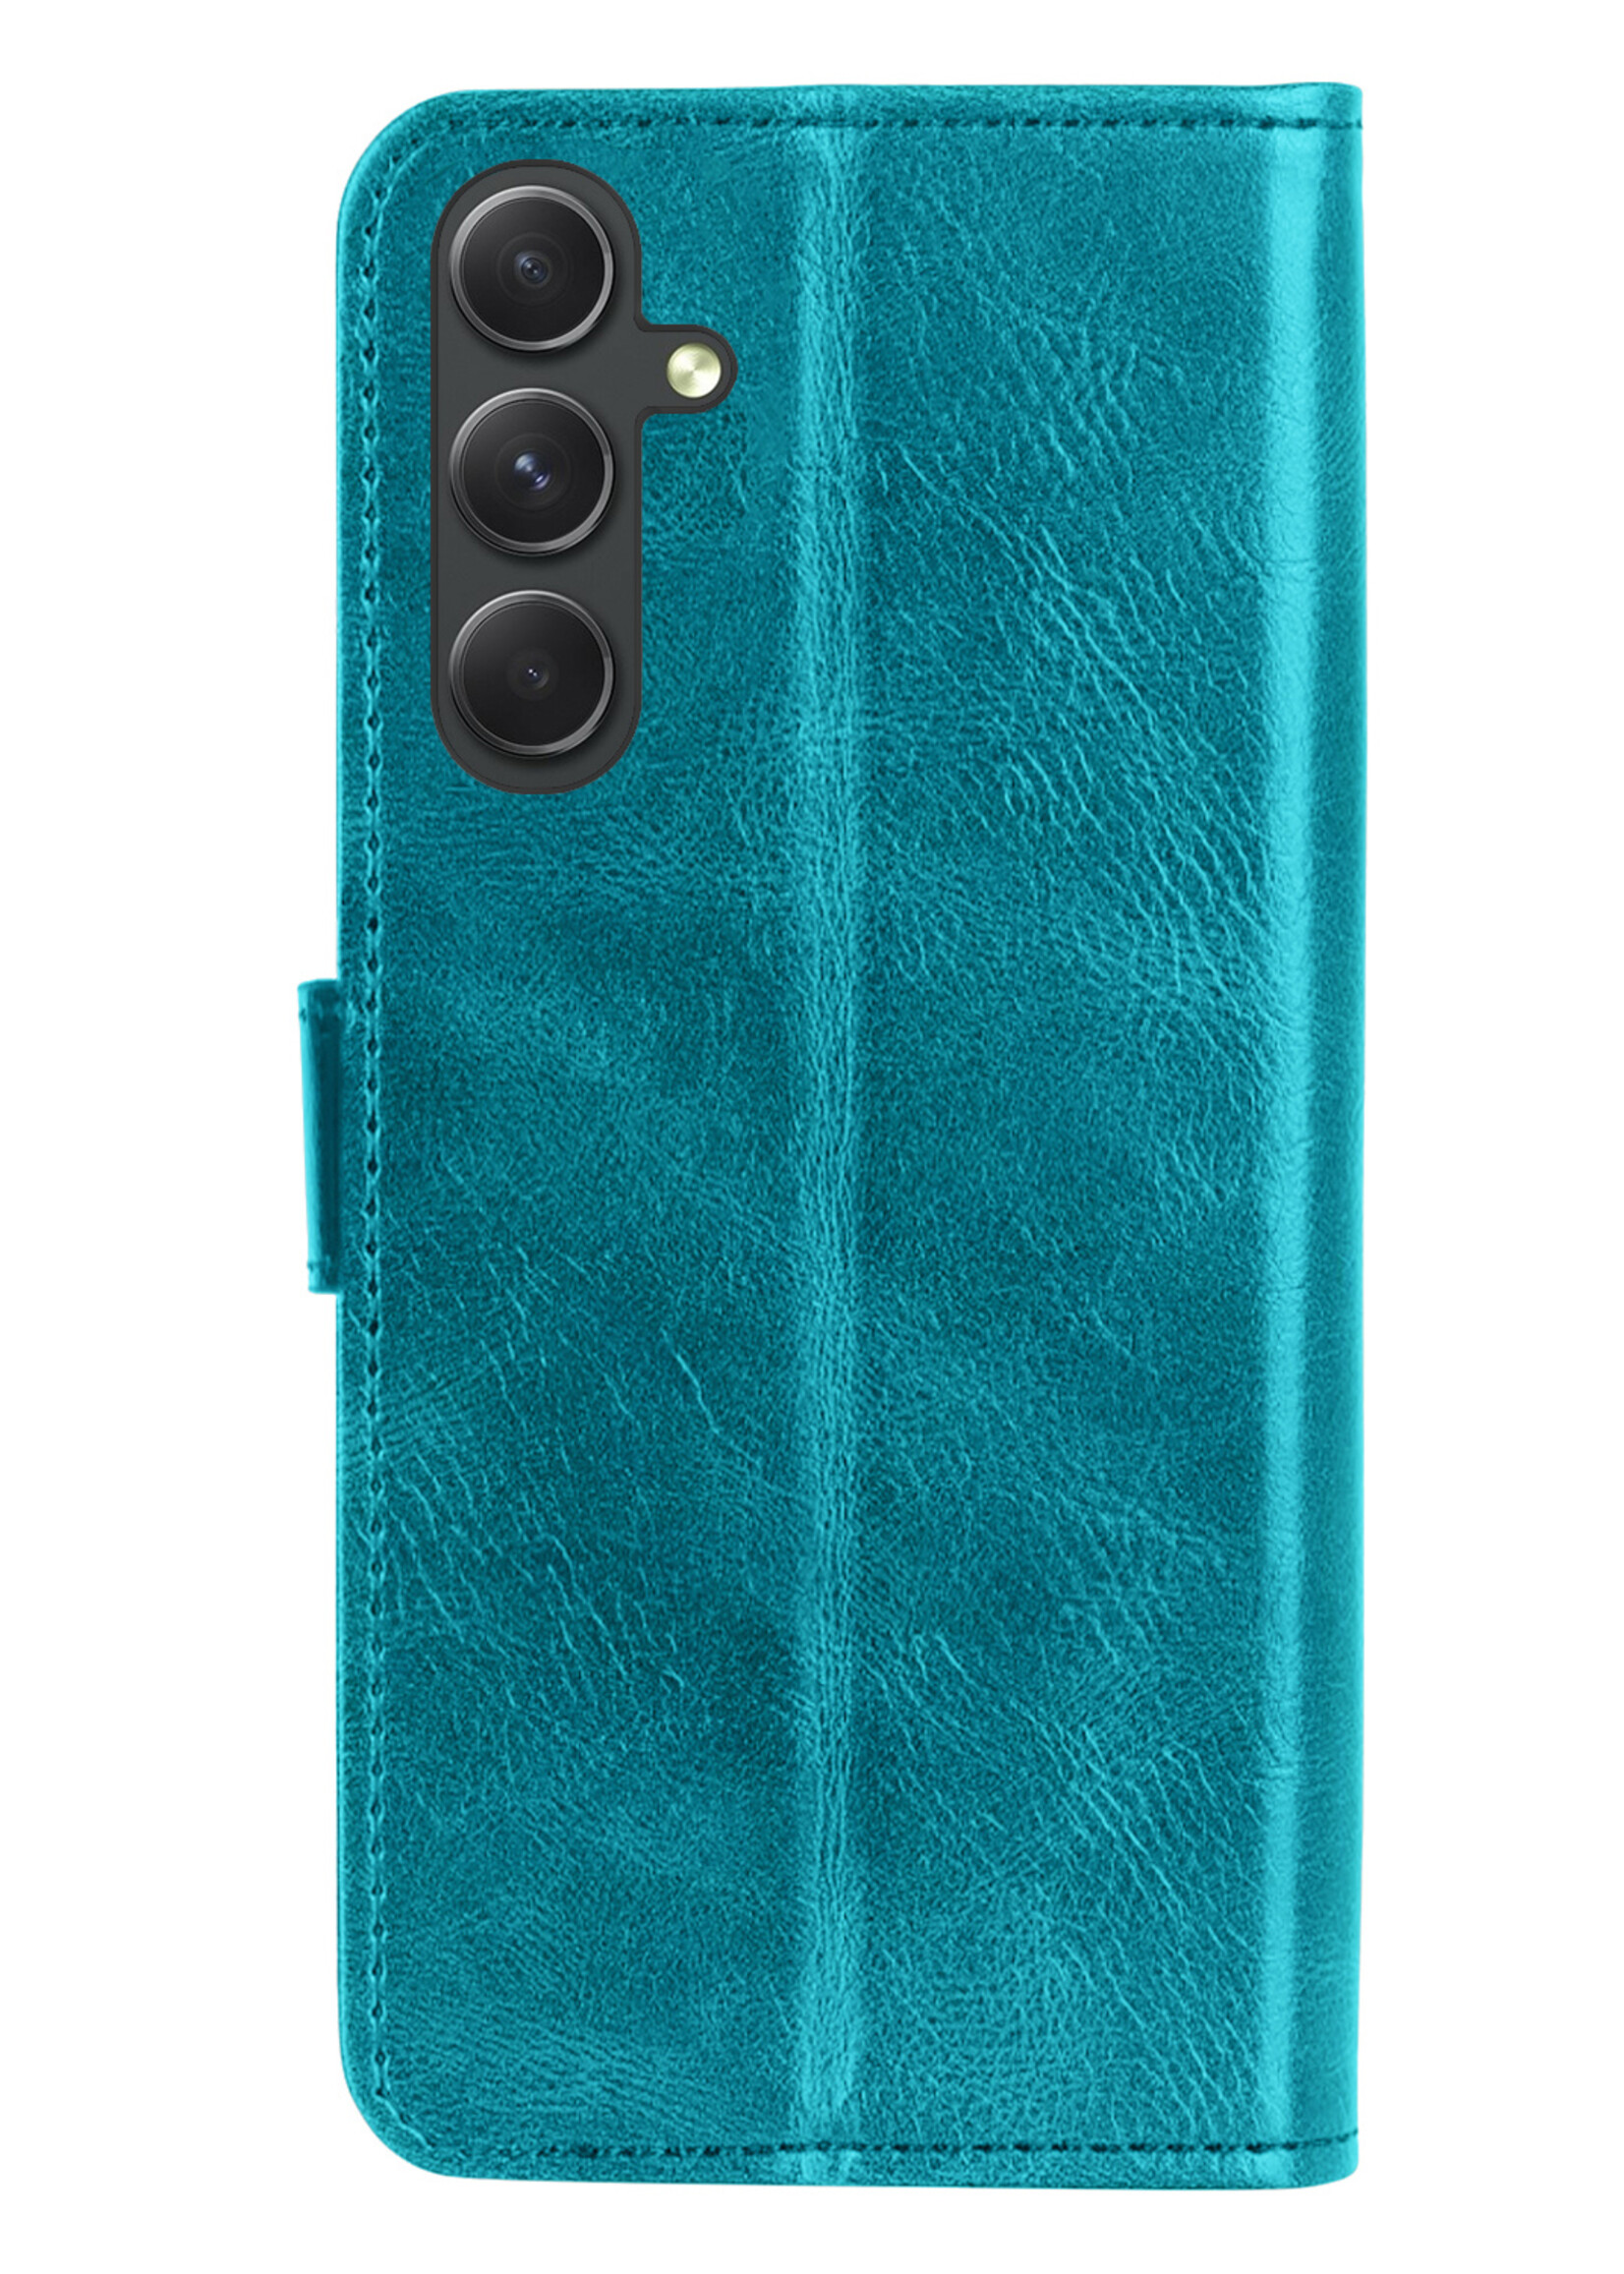 BTH Samsung A34 Hoesje Book Case Hoes Portemonnee Cover Walletcase - Samsung Galaxy A34 Hoes Bookcase Hoesje - Turquoise